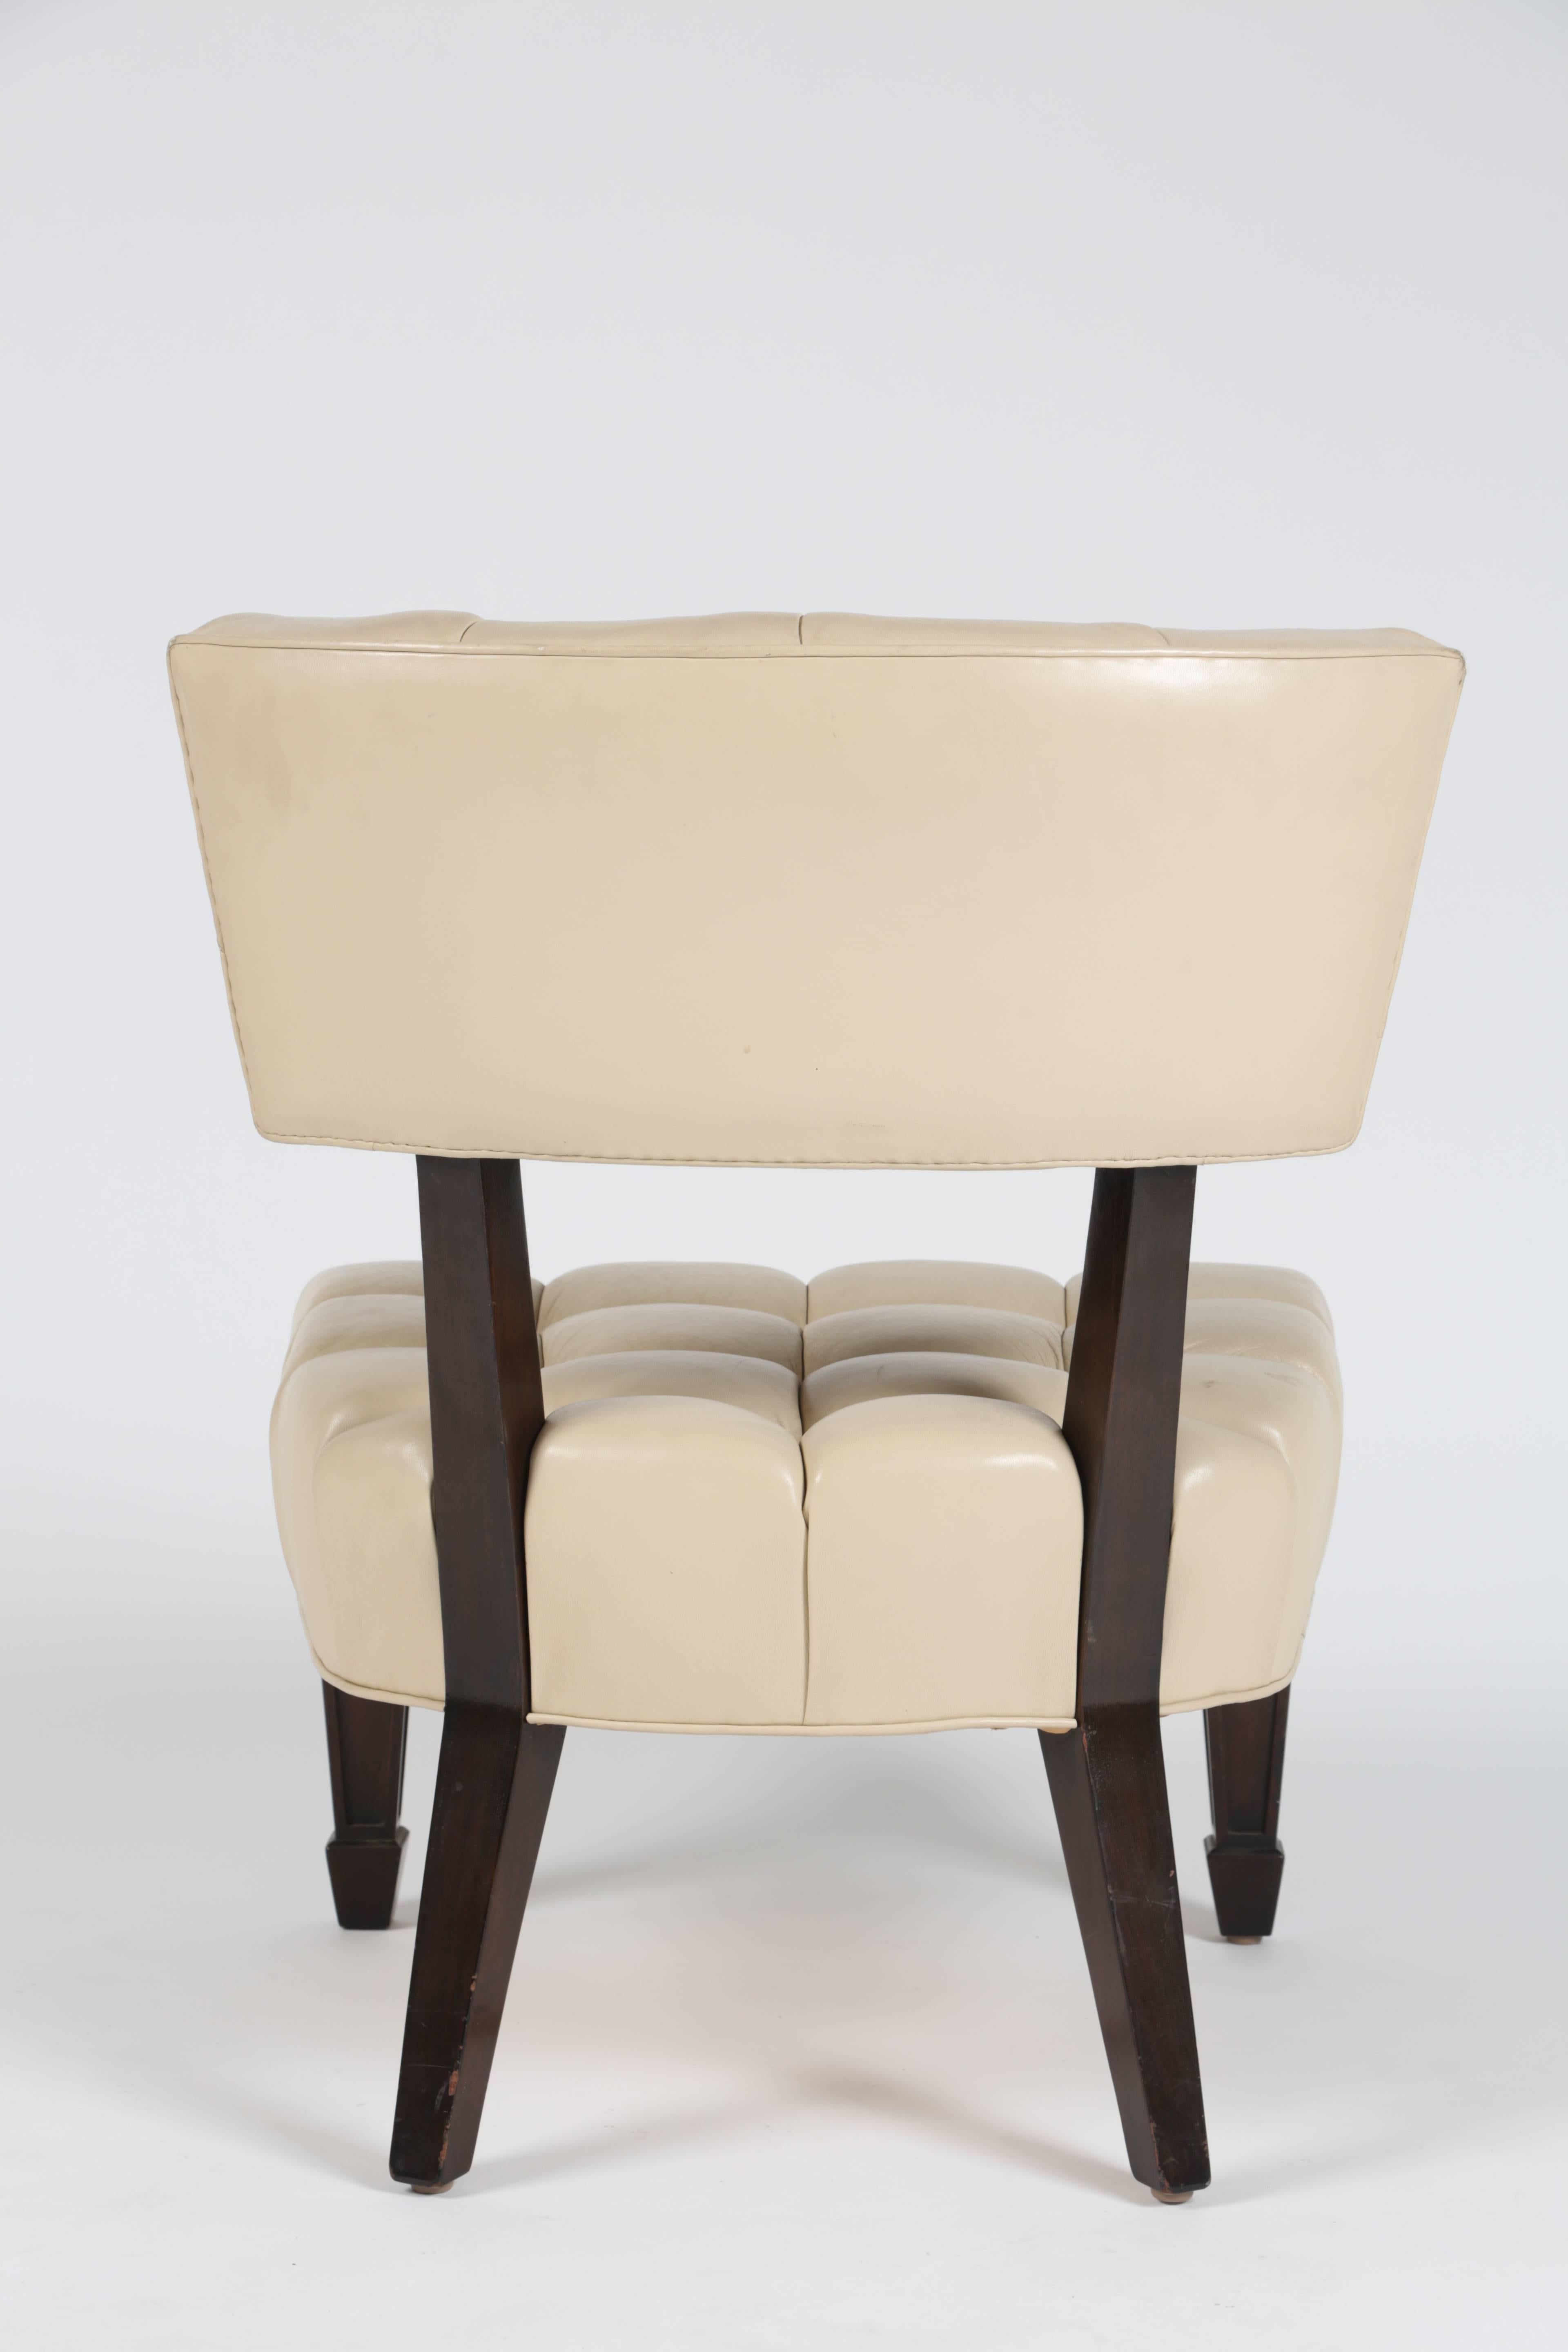 Pair of Tufted Leather Pull Up Chairs by William 